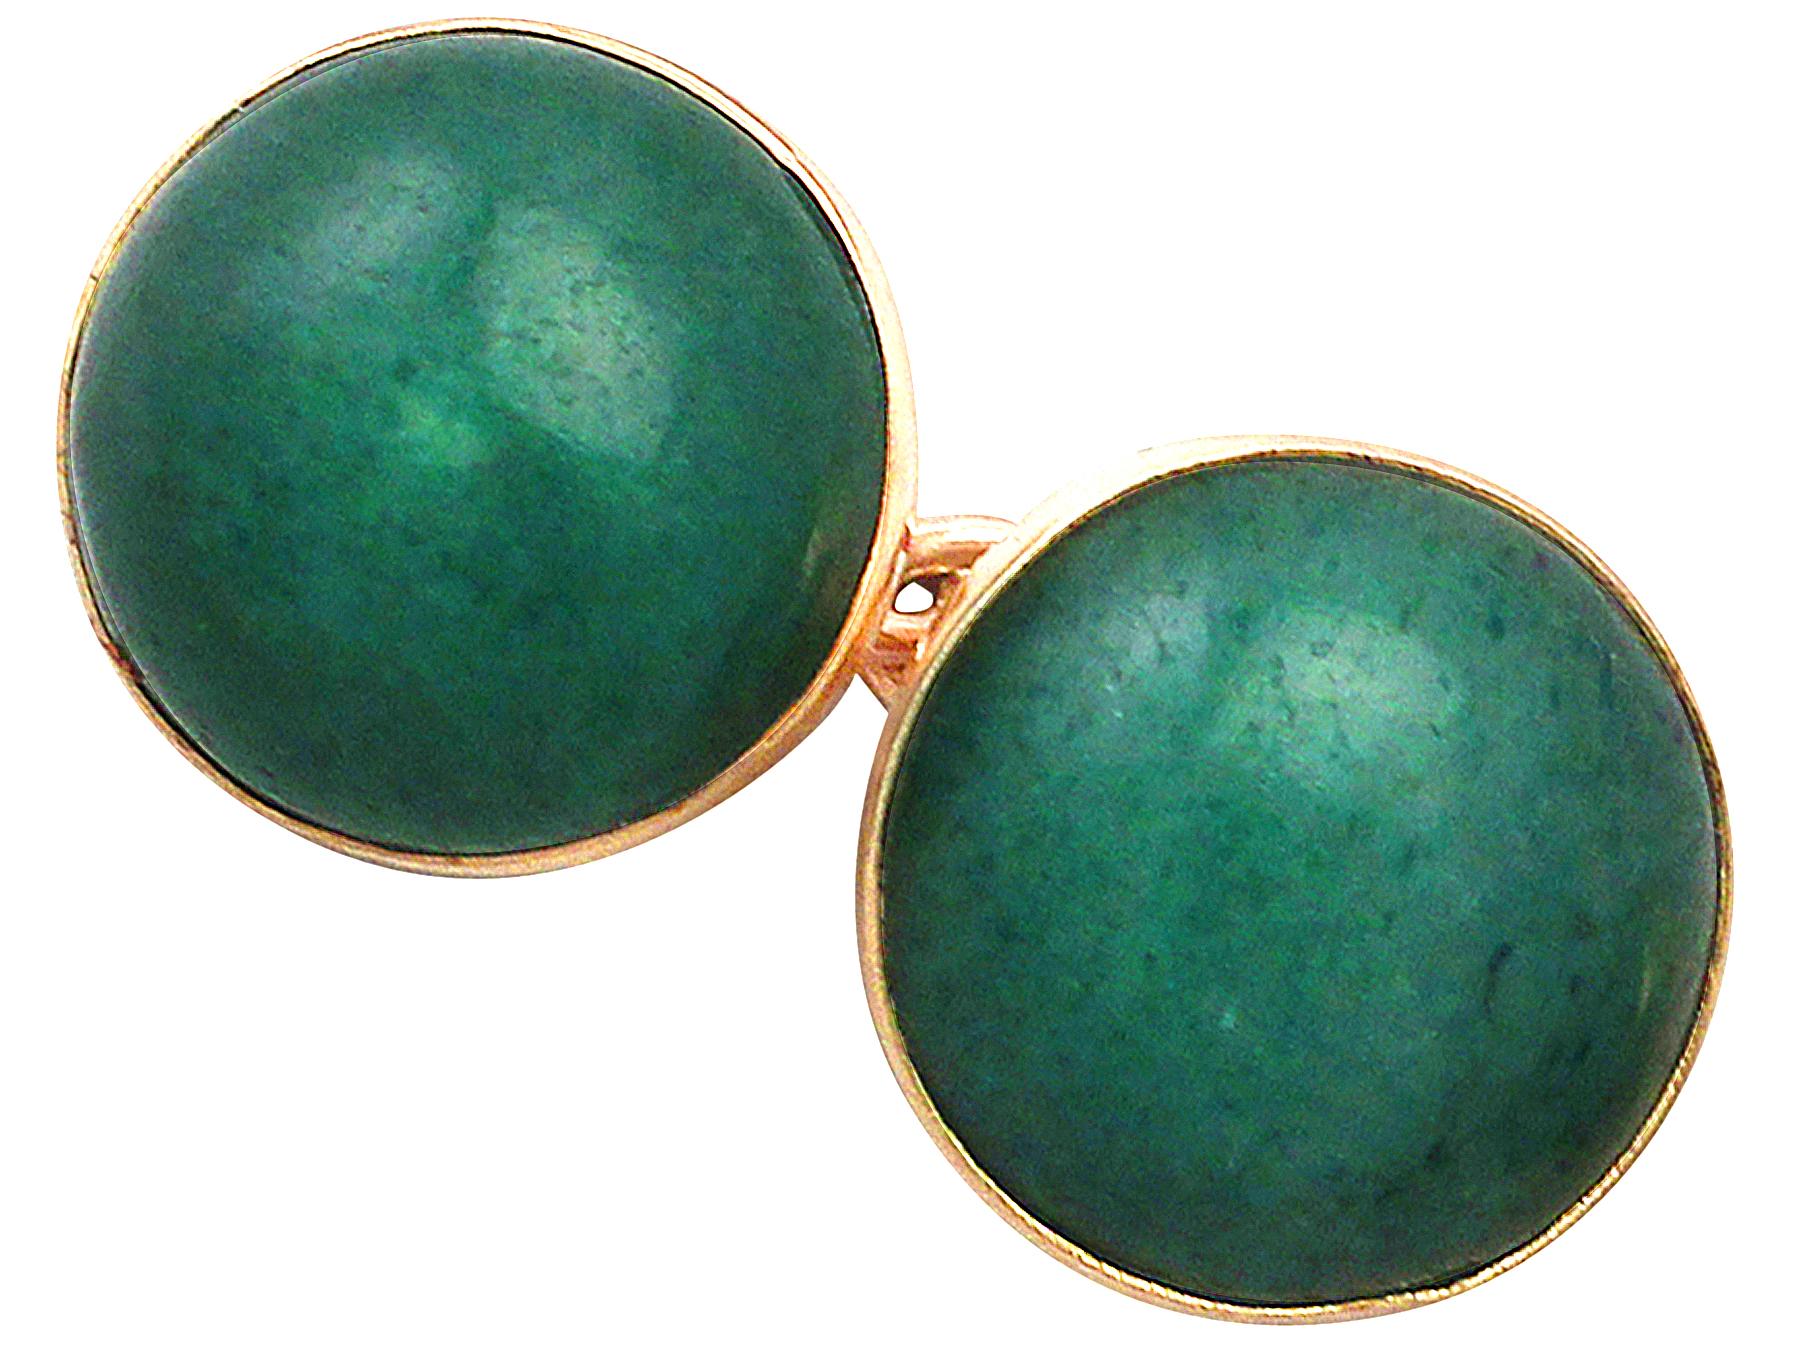 Antique Moss Agate and Yellow Gold Cufflinks In Excellent Condition For Sale In Jesmond, Newcastle Upon Tyne